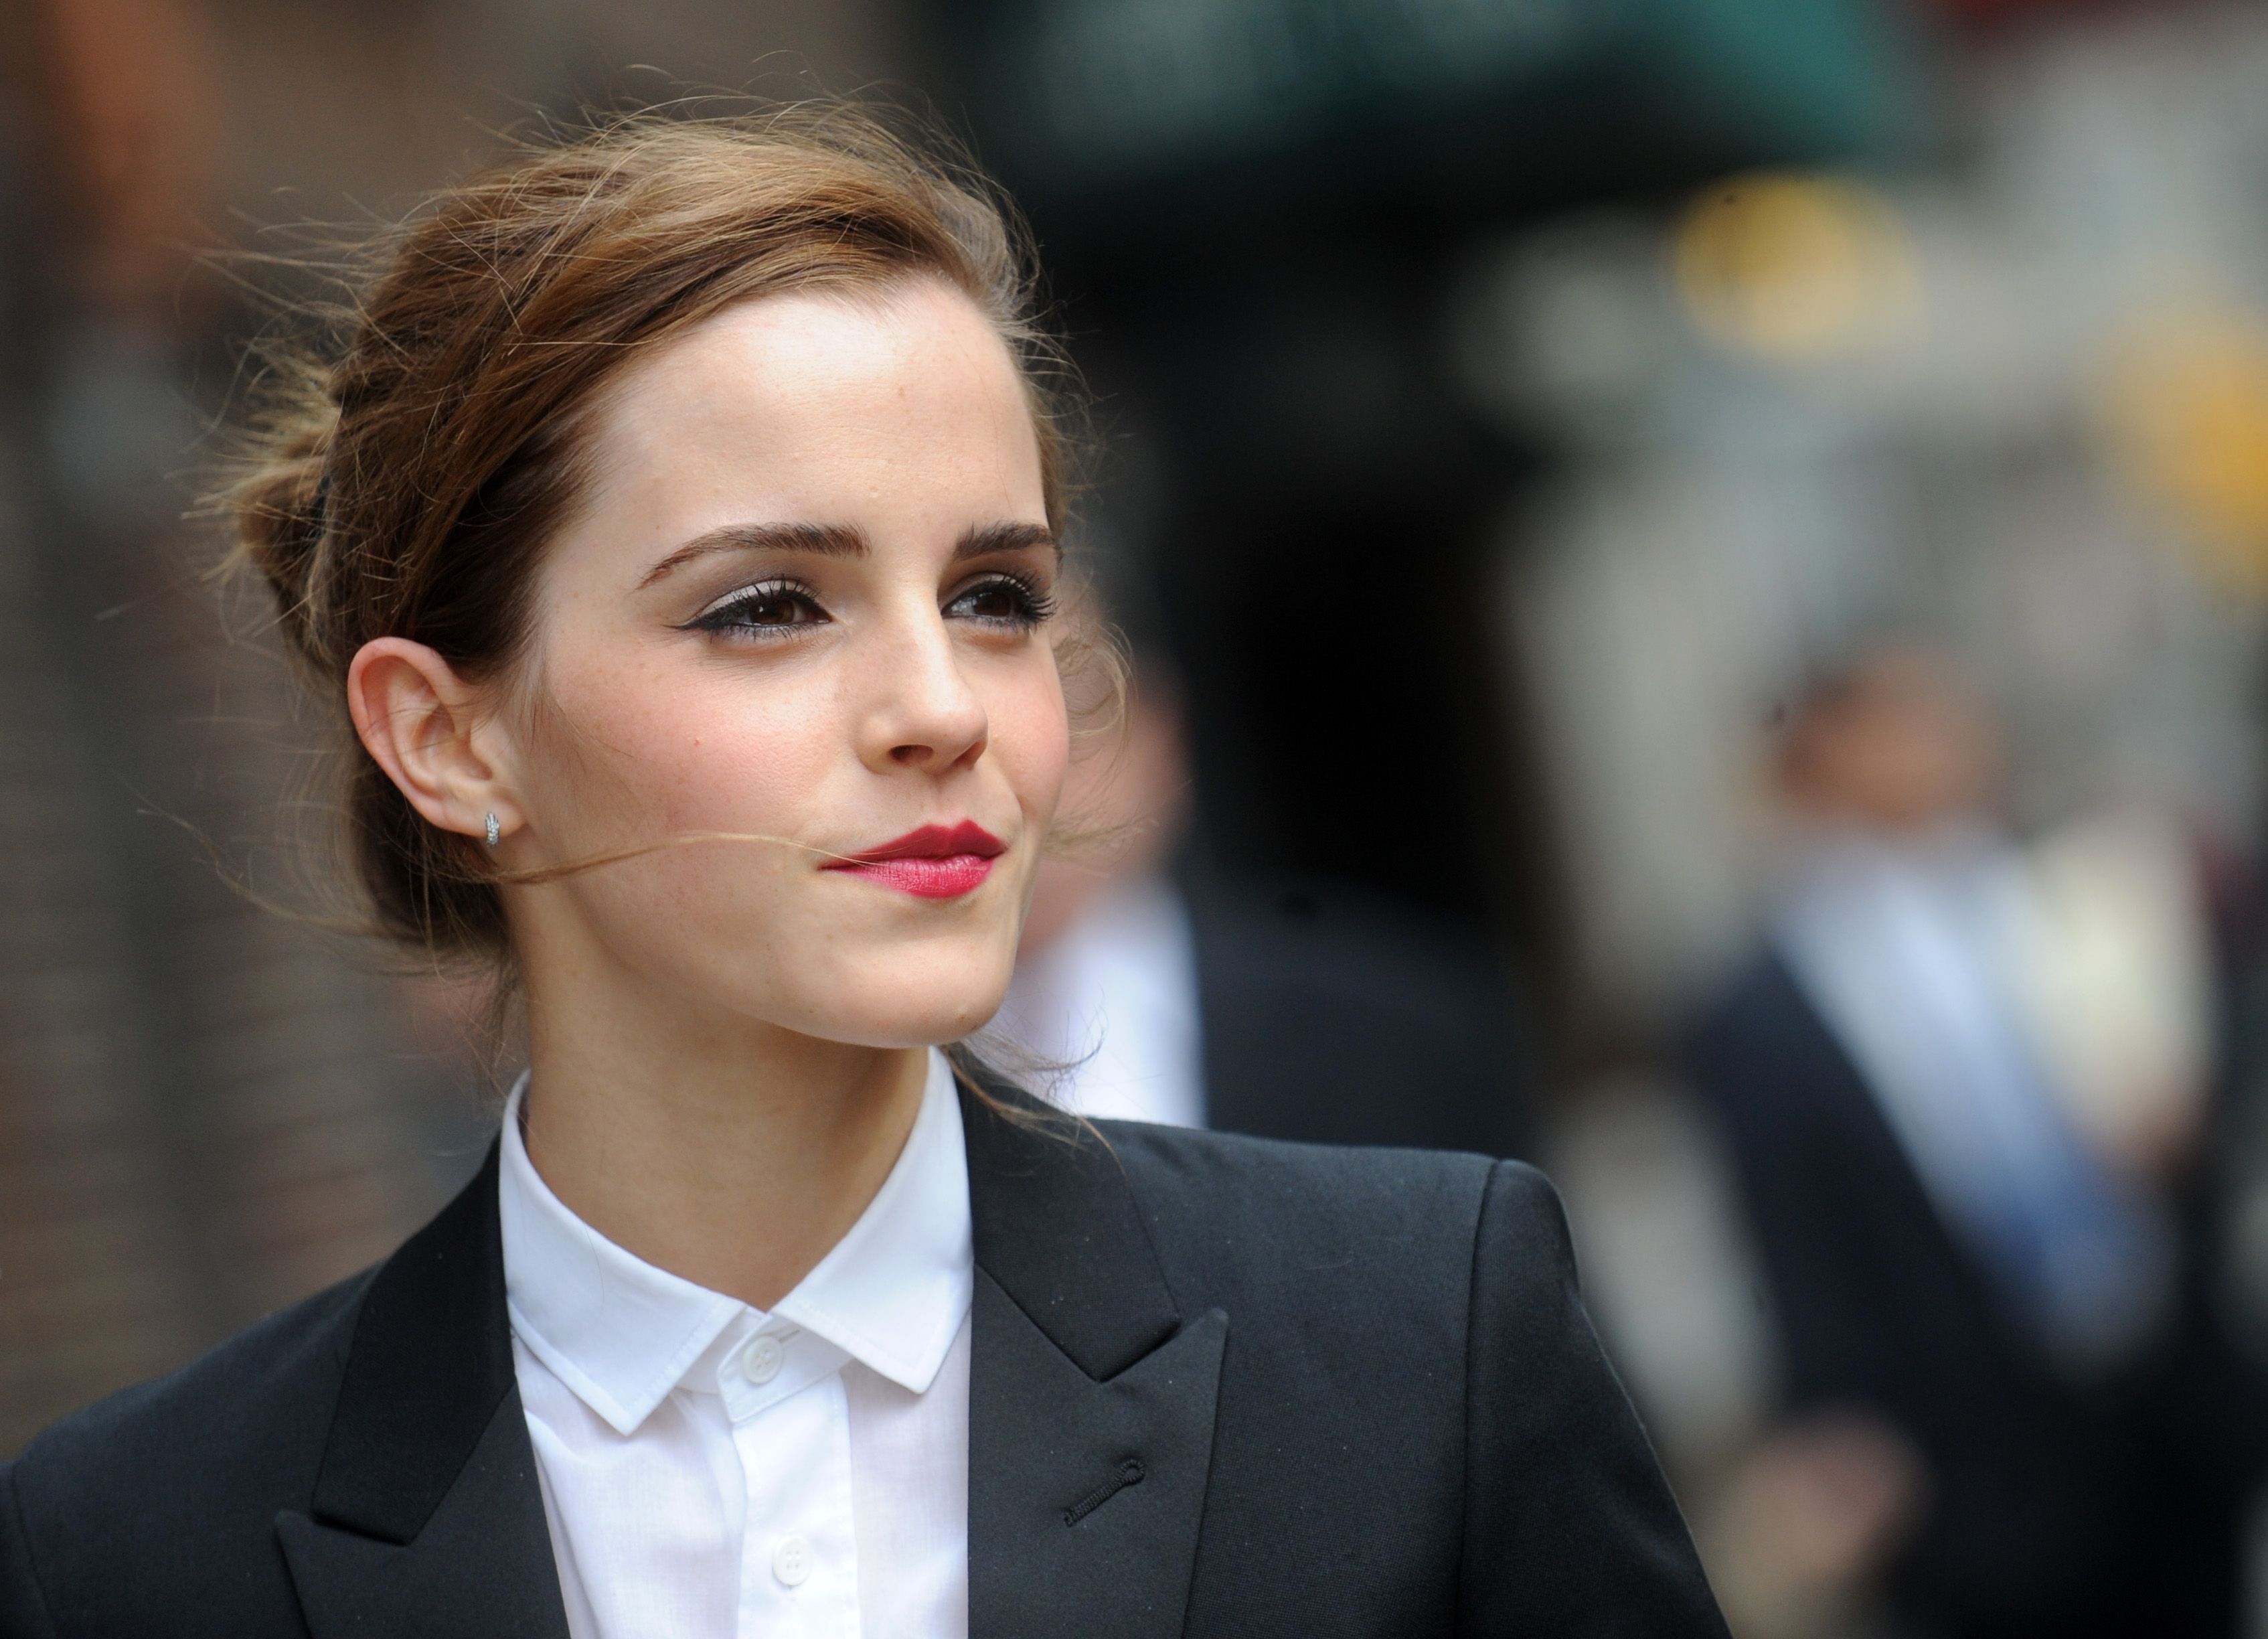 Many of you might know her as Hermoine from the Harry Potter movie franchise. The quick-witted, clever and intelligent Hermione is much more than that in real life.